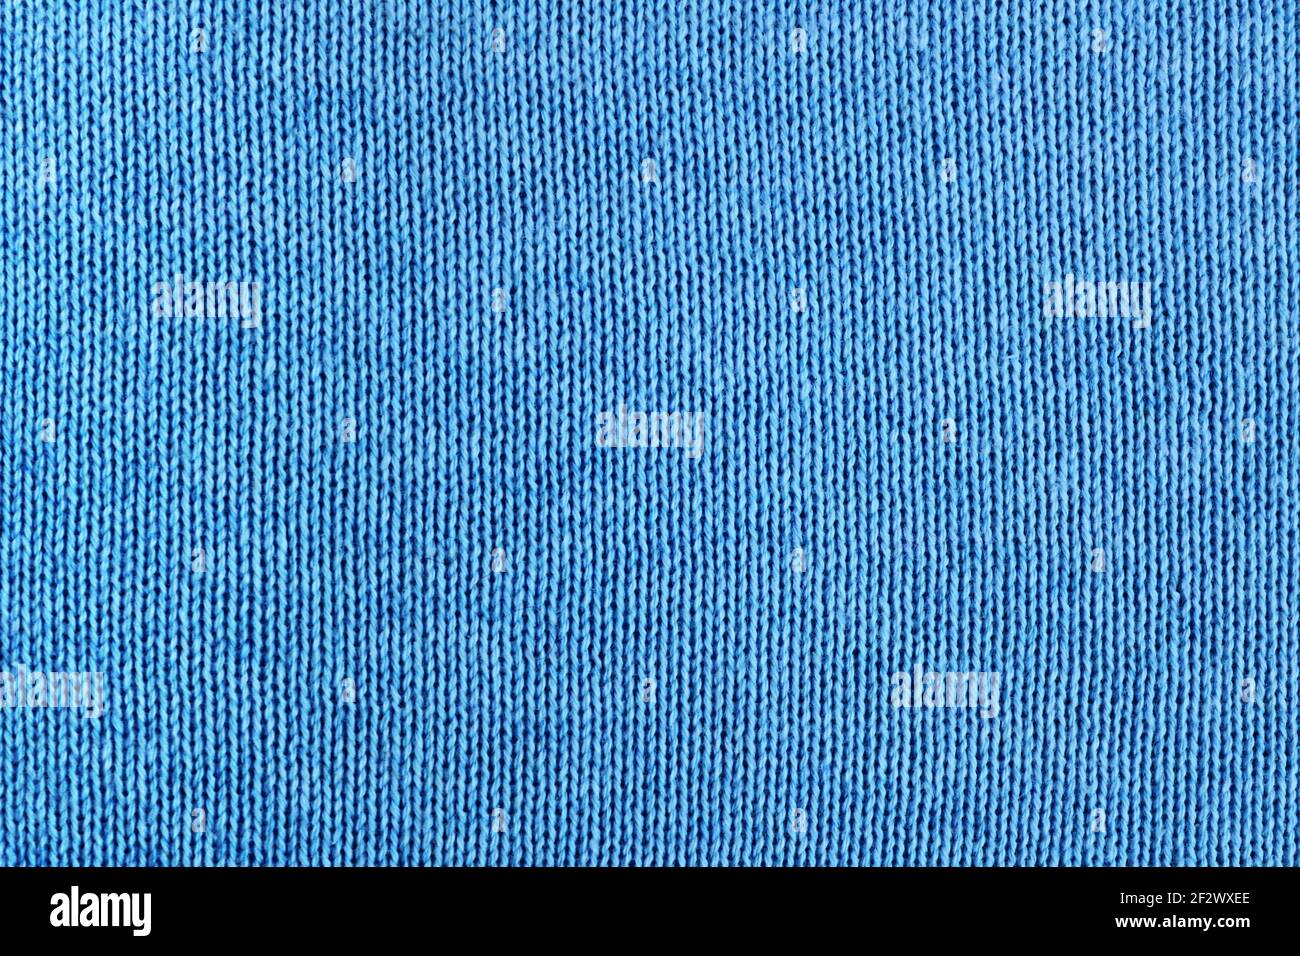 Knitted blue texture background. Knitwear Stock Photo